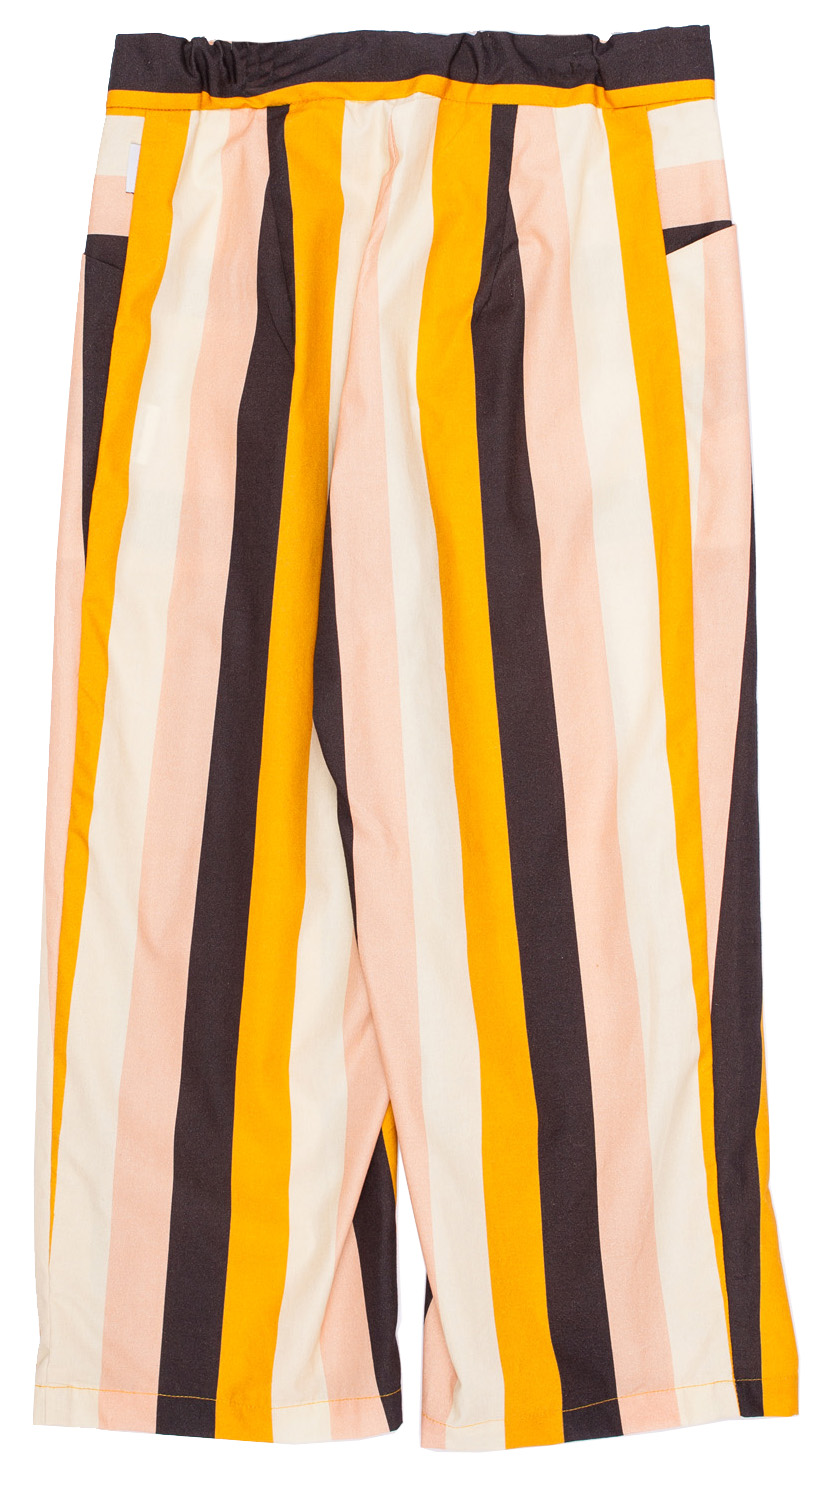                                                                                                                       Relaxed Pants  - Multicolour stripes